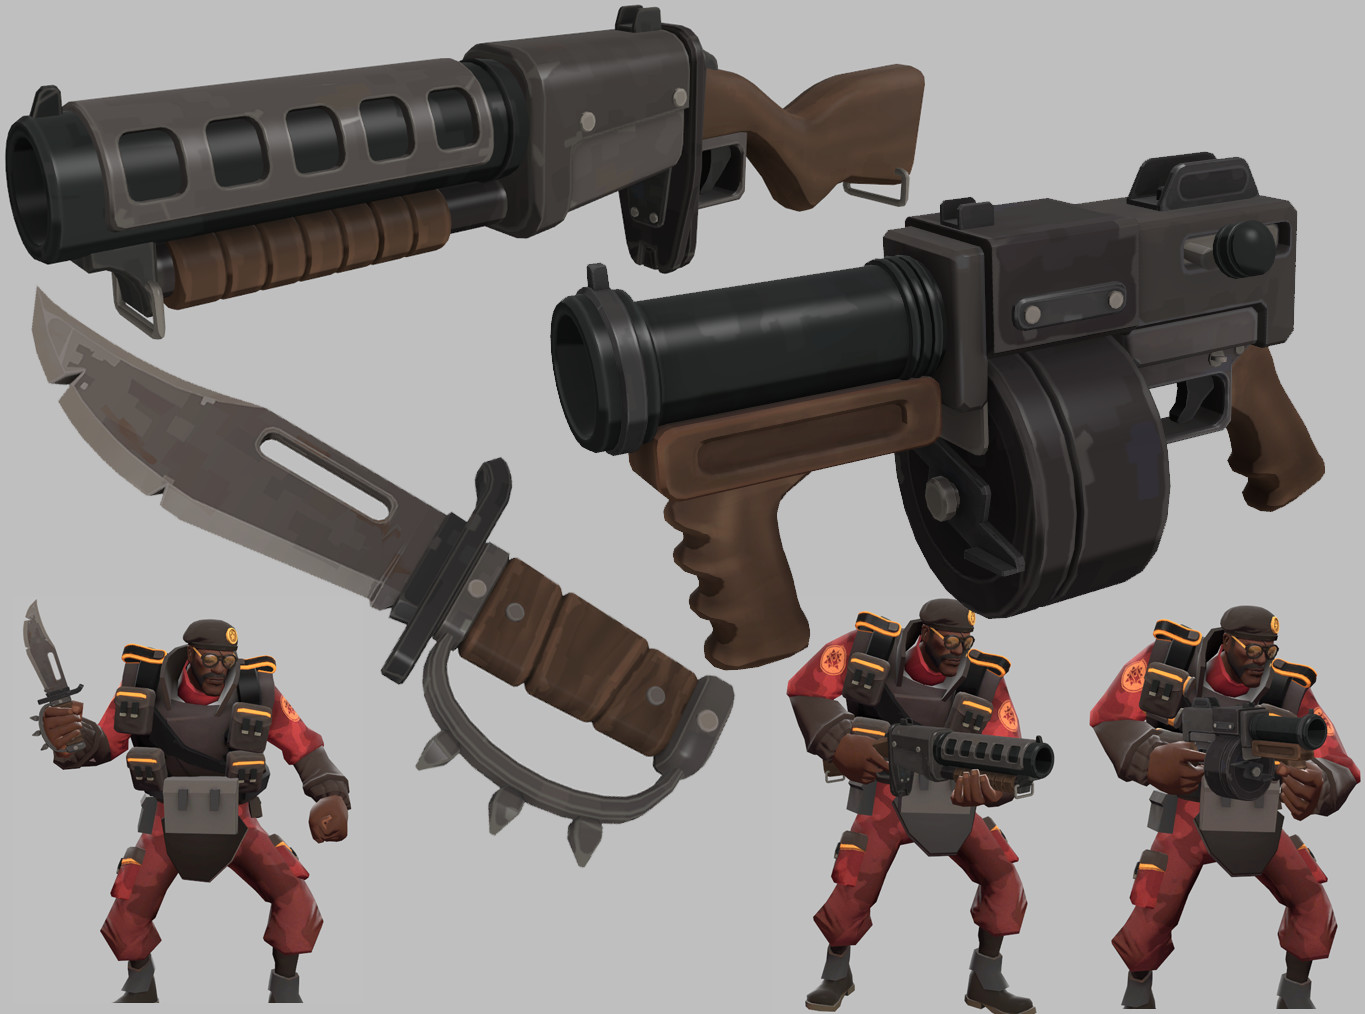 Military Demoman set, 3 weapons and 3 cosmetics